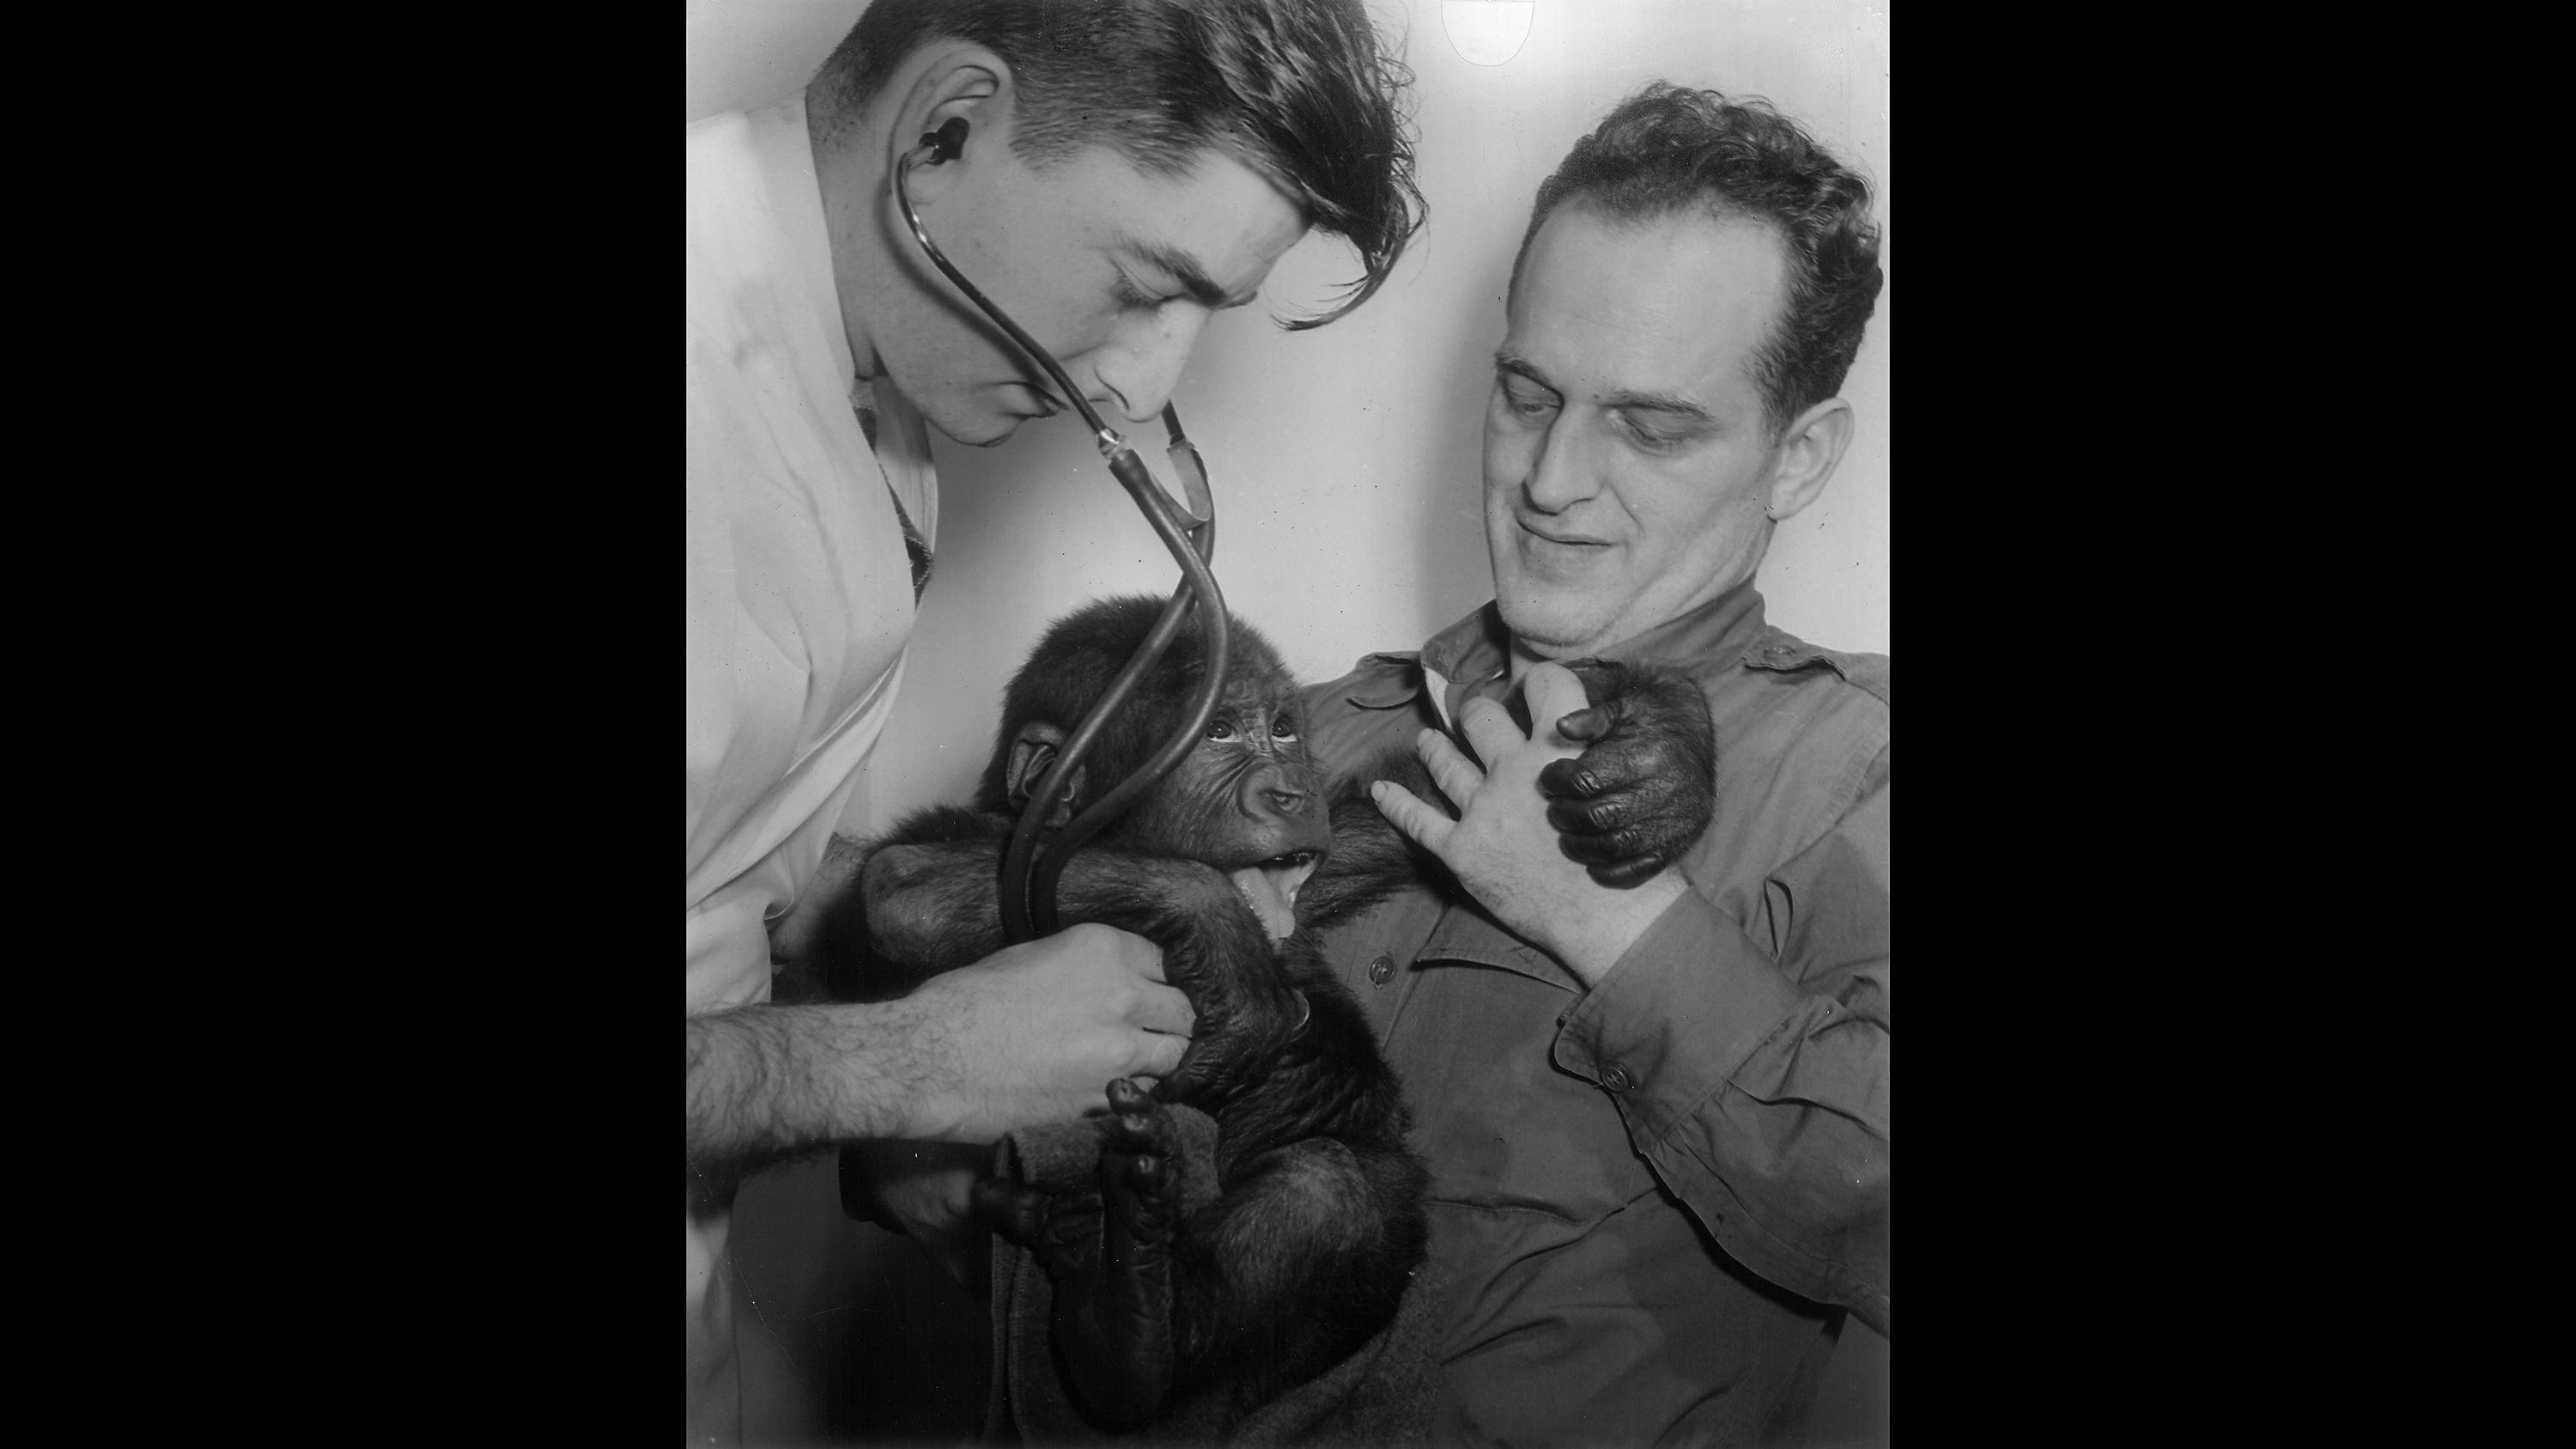 Dr. Lester Fisher, Lincoln Park Zoo's first veterinarian, treats lowland gorilla Sinbad in 1948. Fisher would become the zoo's director in 1962, overseeing the modernization and improvement of animal care and veterinary strategies during his 30-year tenure. (Courtesy Chicago Park District and Chicago History Museum)